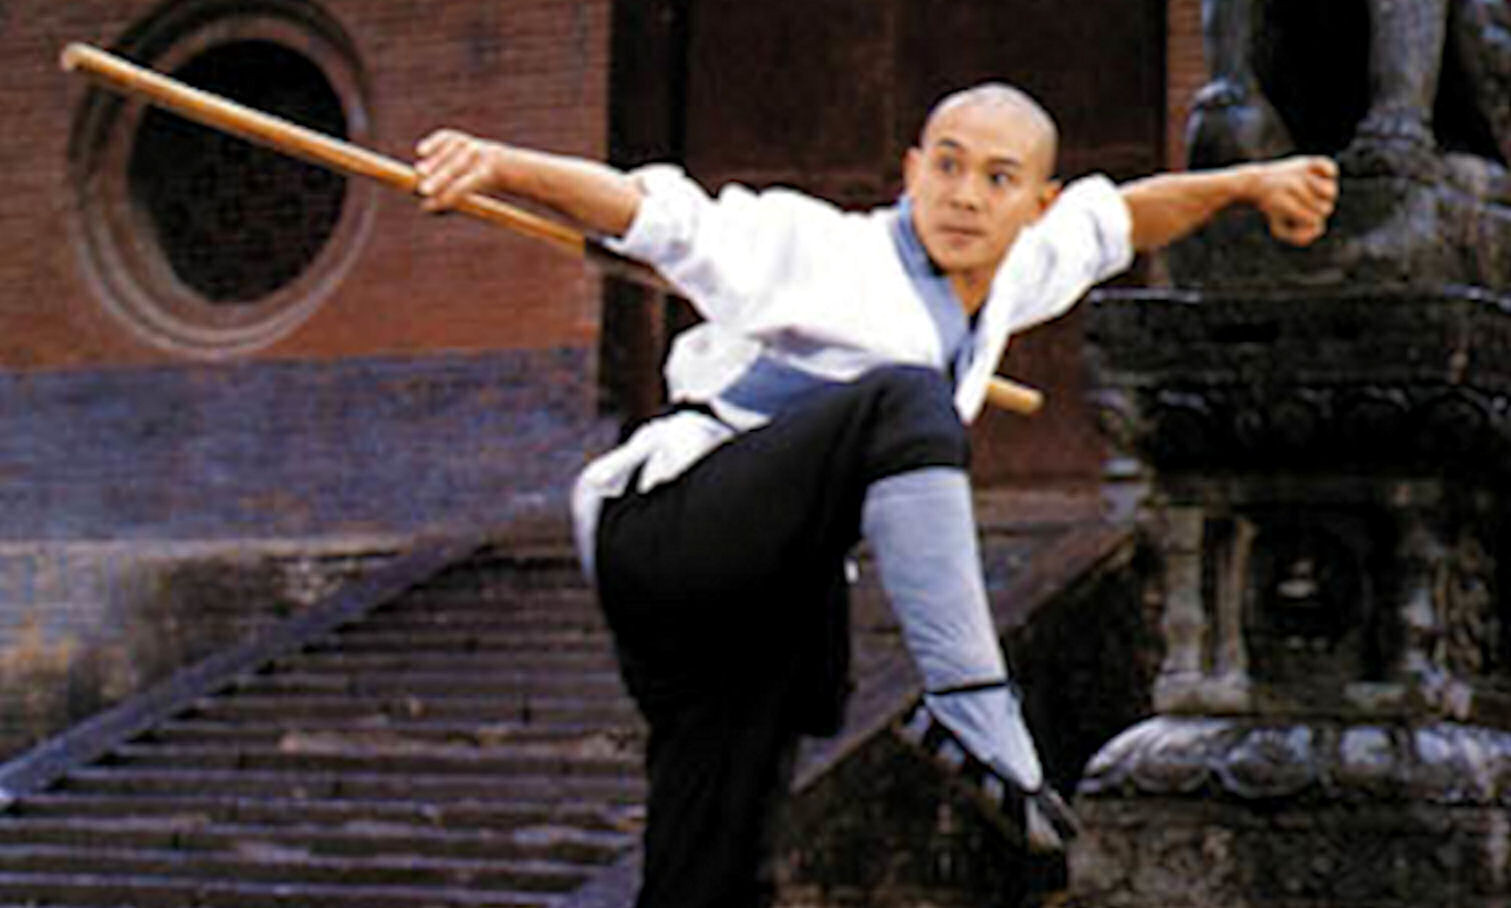 Top Martial Arts Action Stars and Their Training Backgrounds